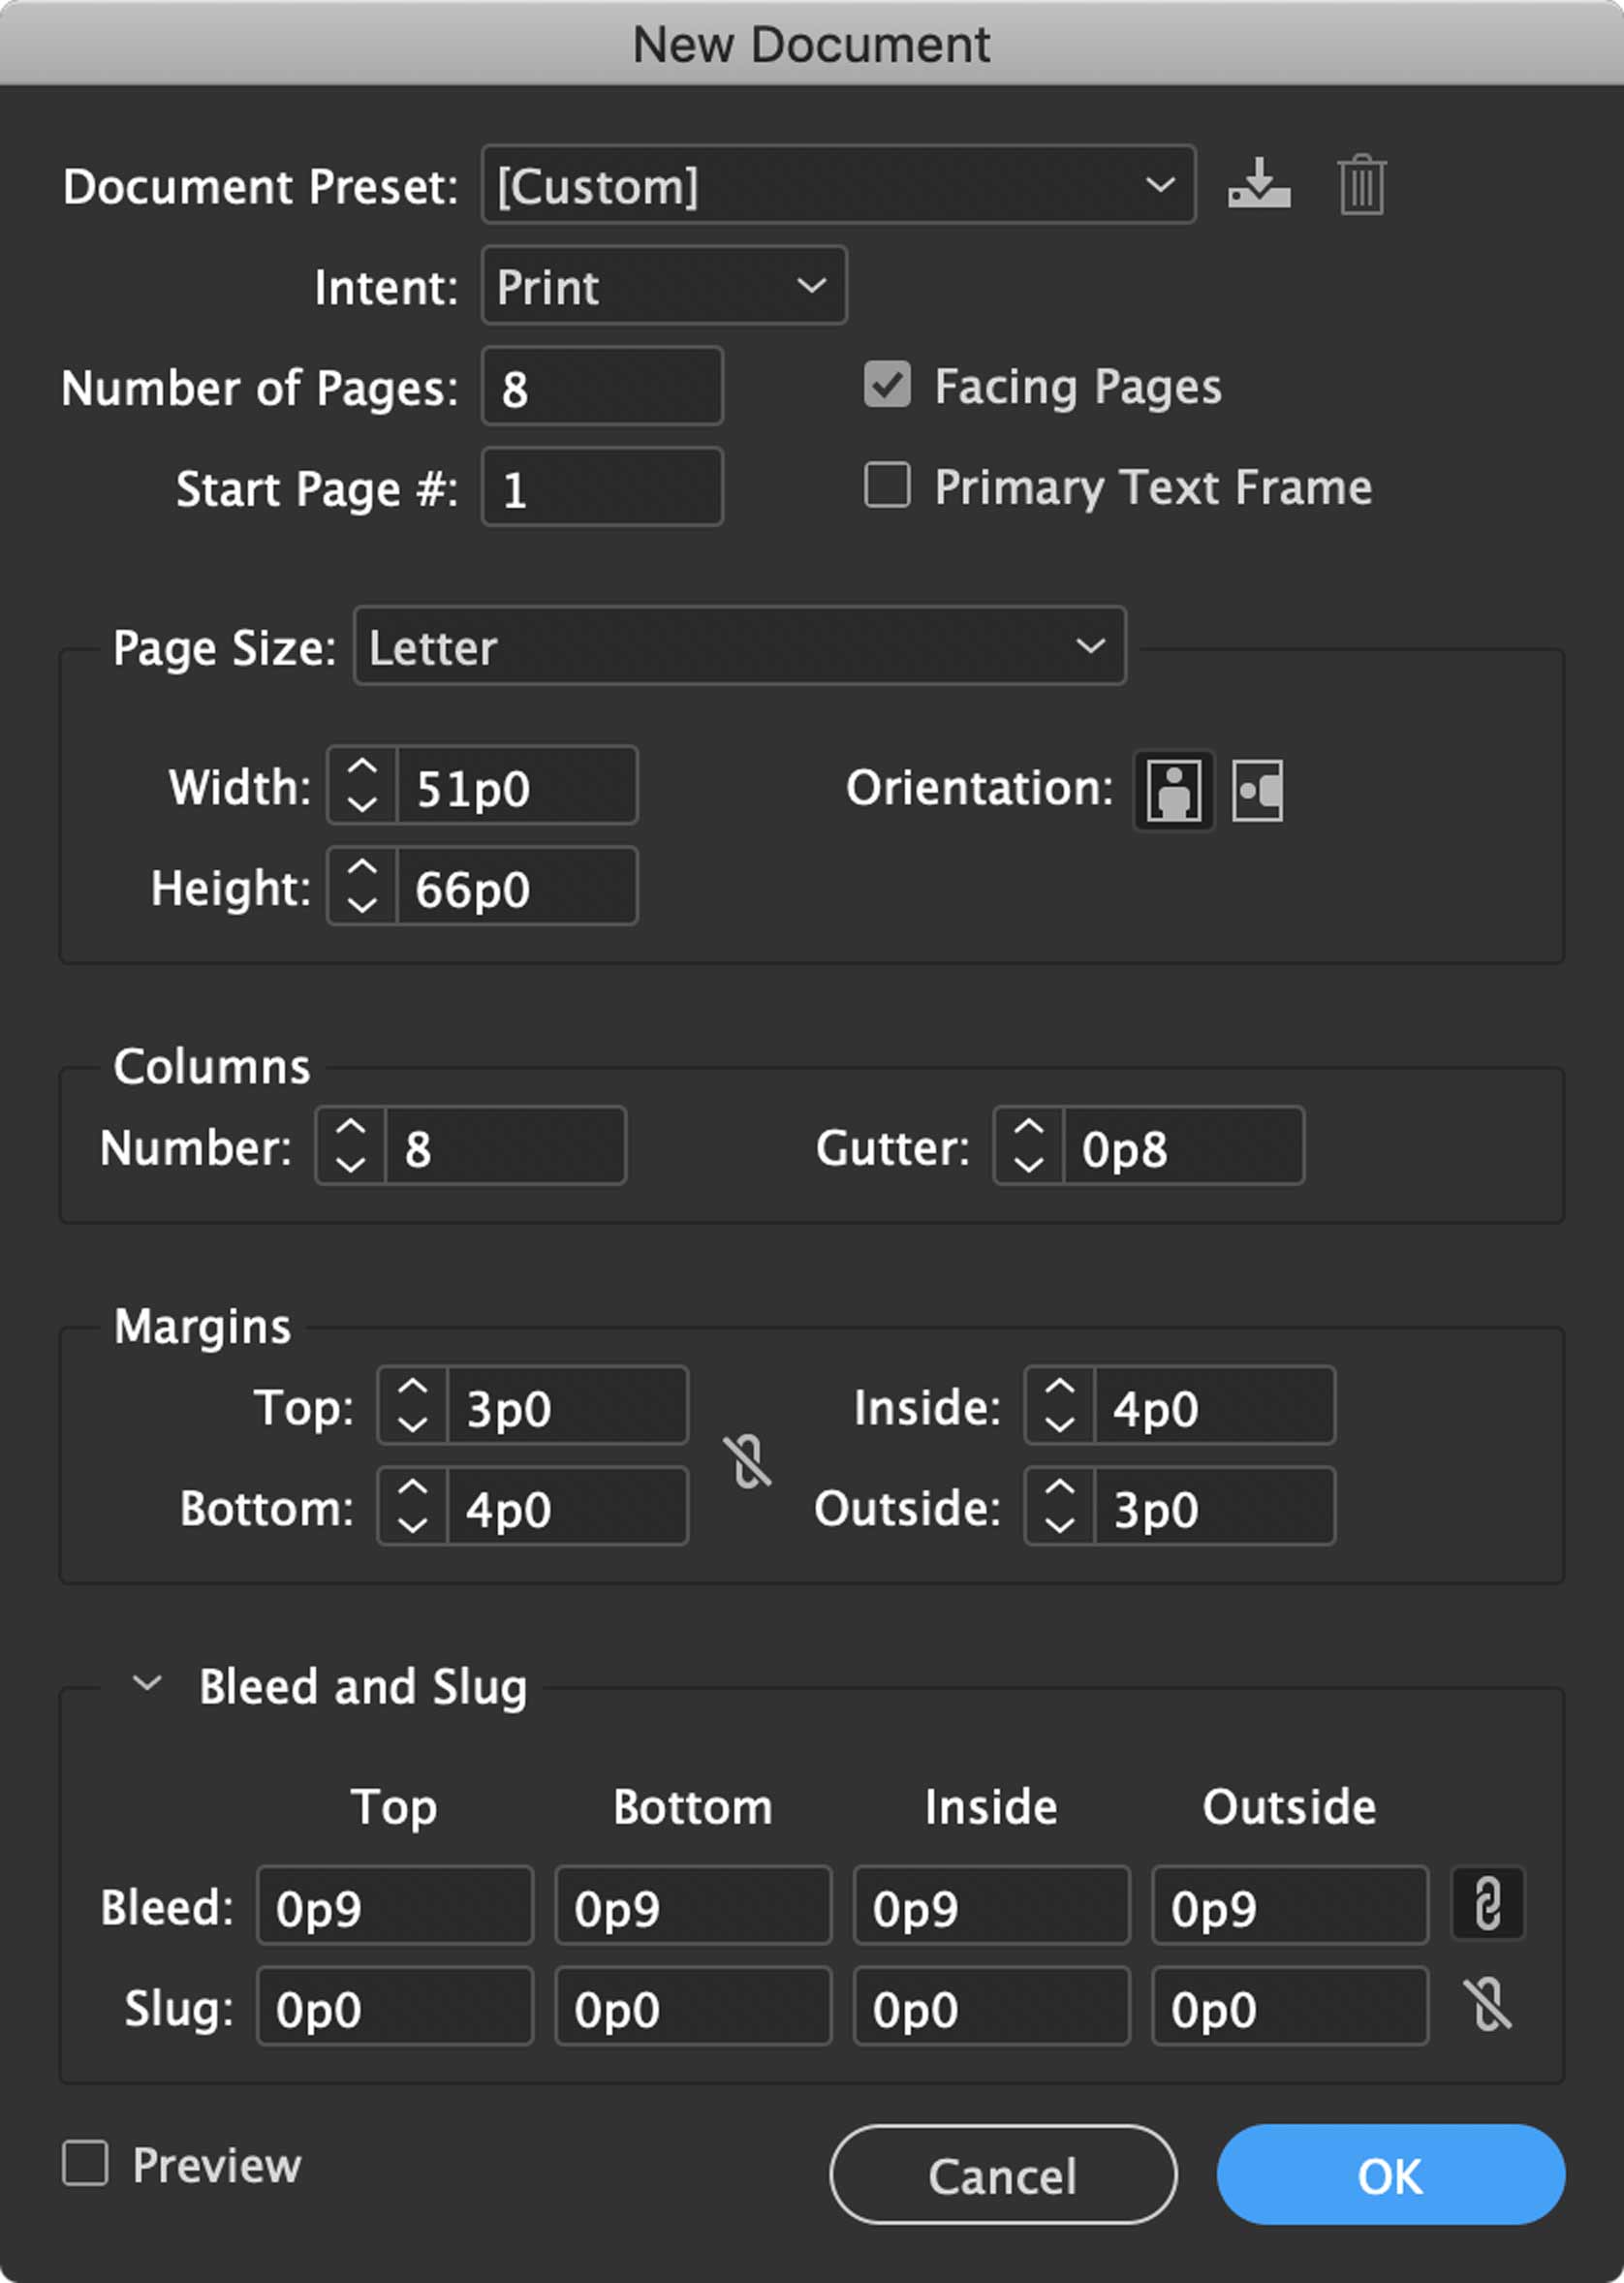 indesign-new-document-dialogue